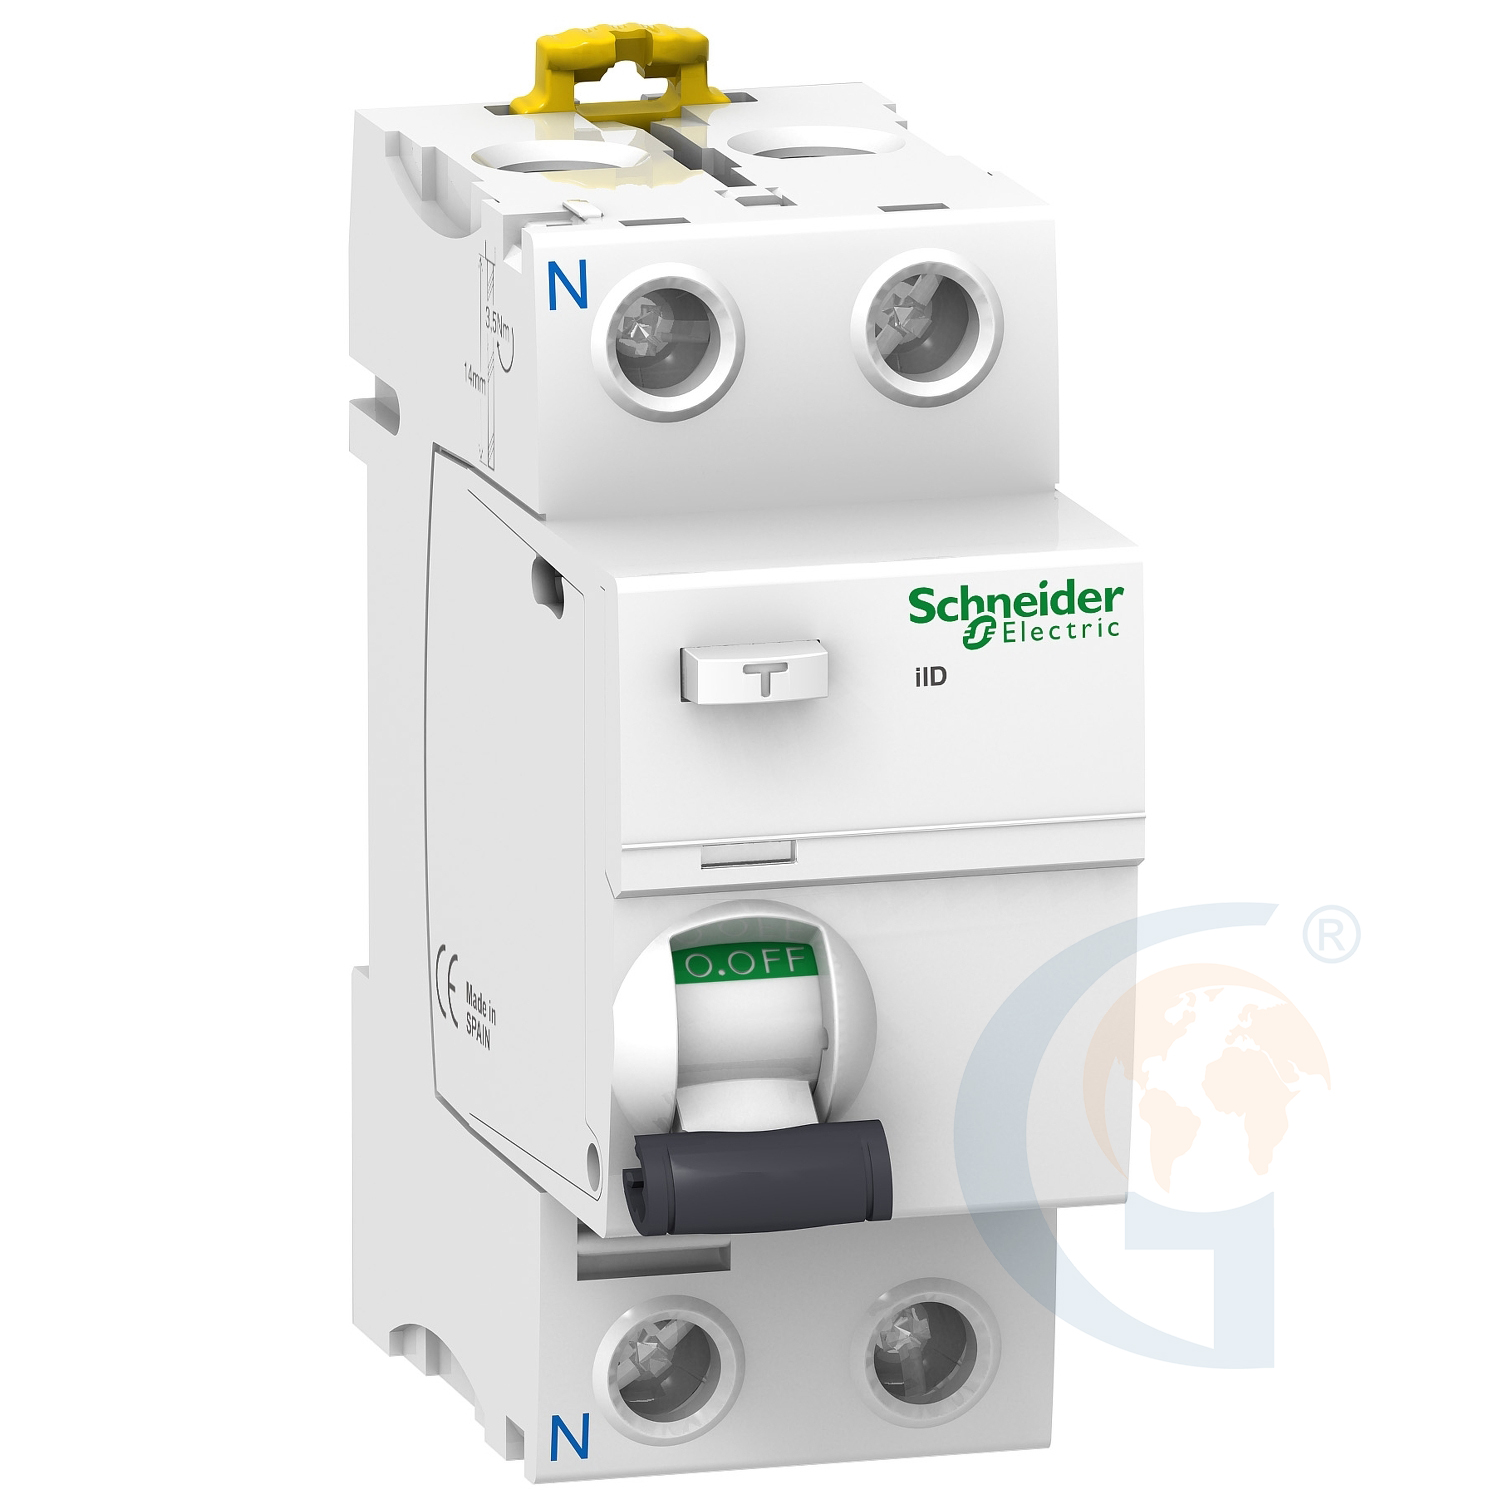 Schneider Electric A9R31263 ACTI 9 IID – RCCB – 2P – 63A – 30MA – TYPE A-SI https://gesrepair.com/wp-content/uploads/2020/Schneider/Schneider_Electric_A9R31263_.jpg